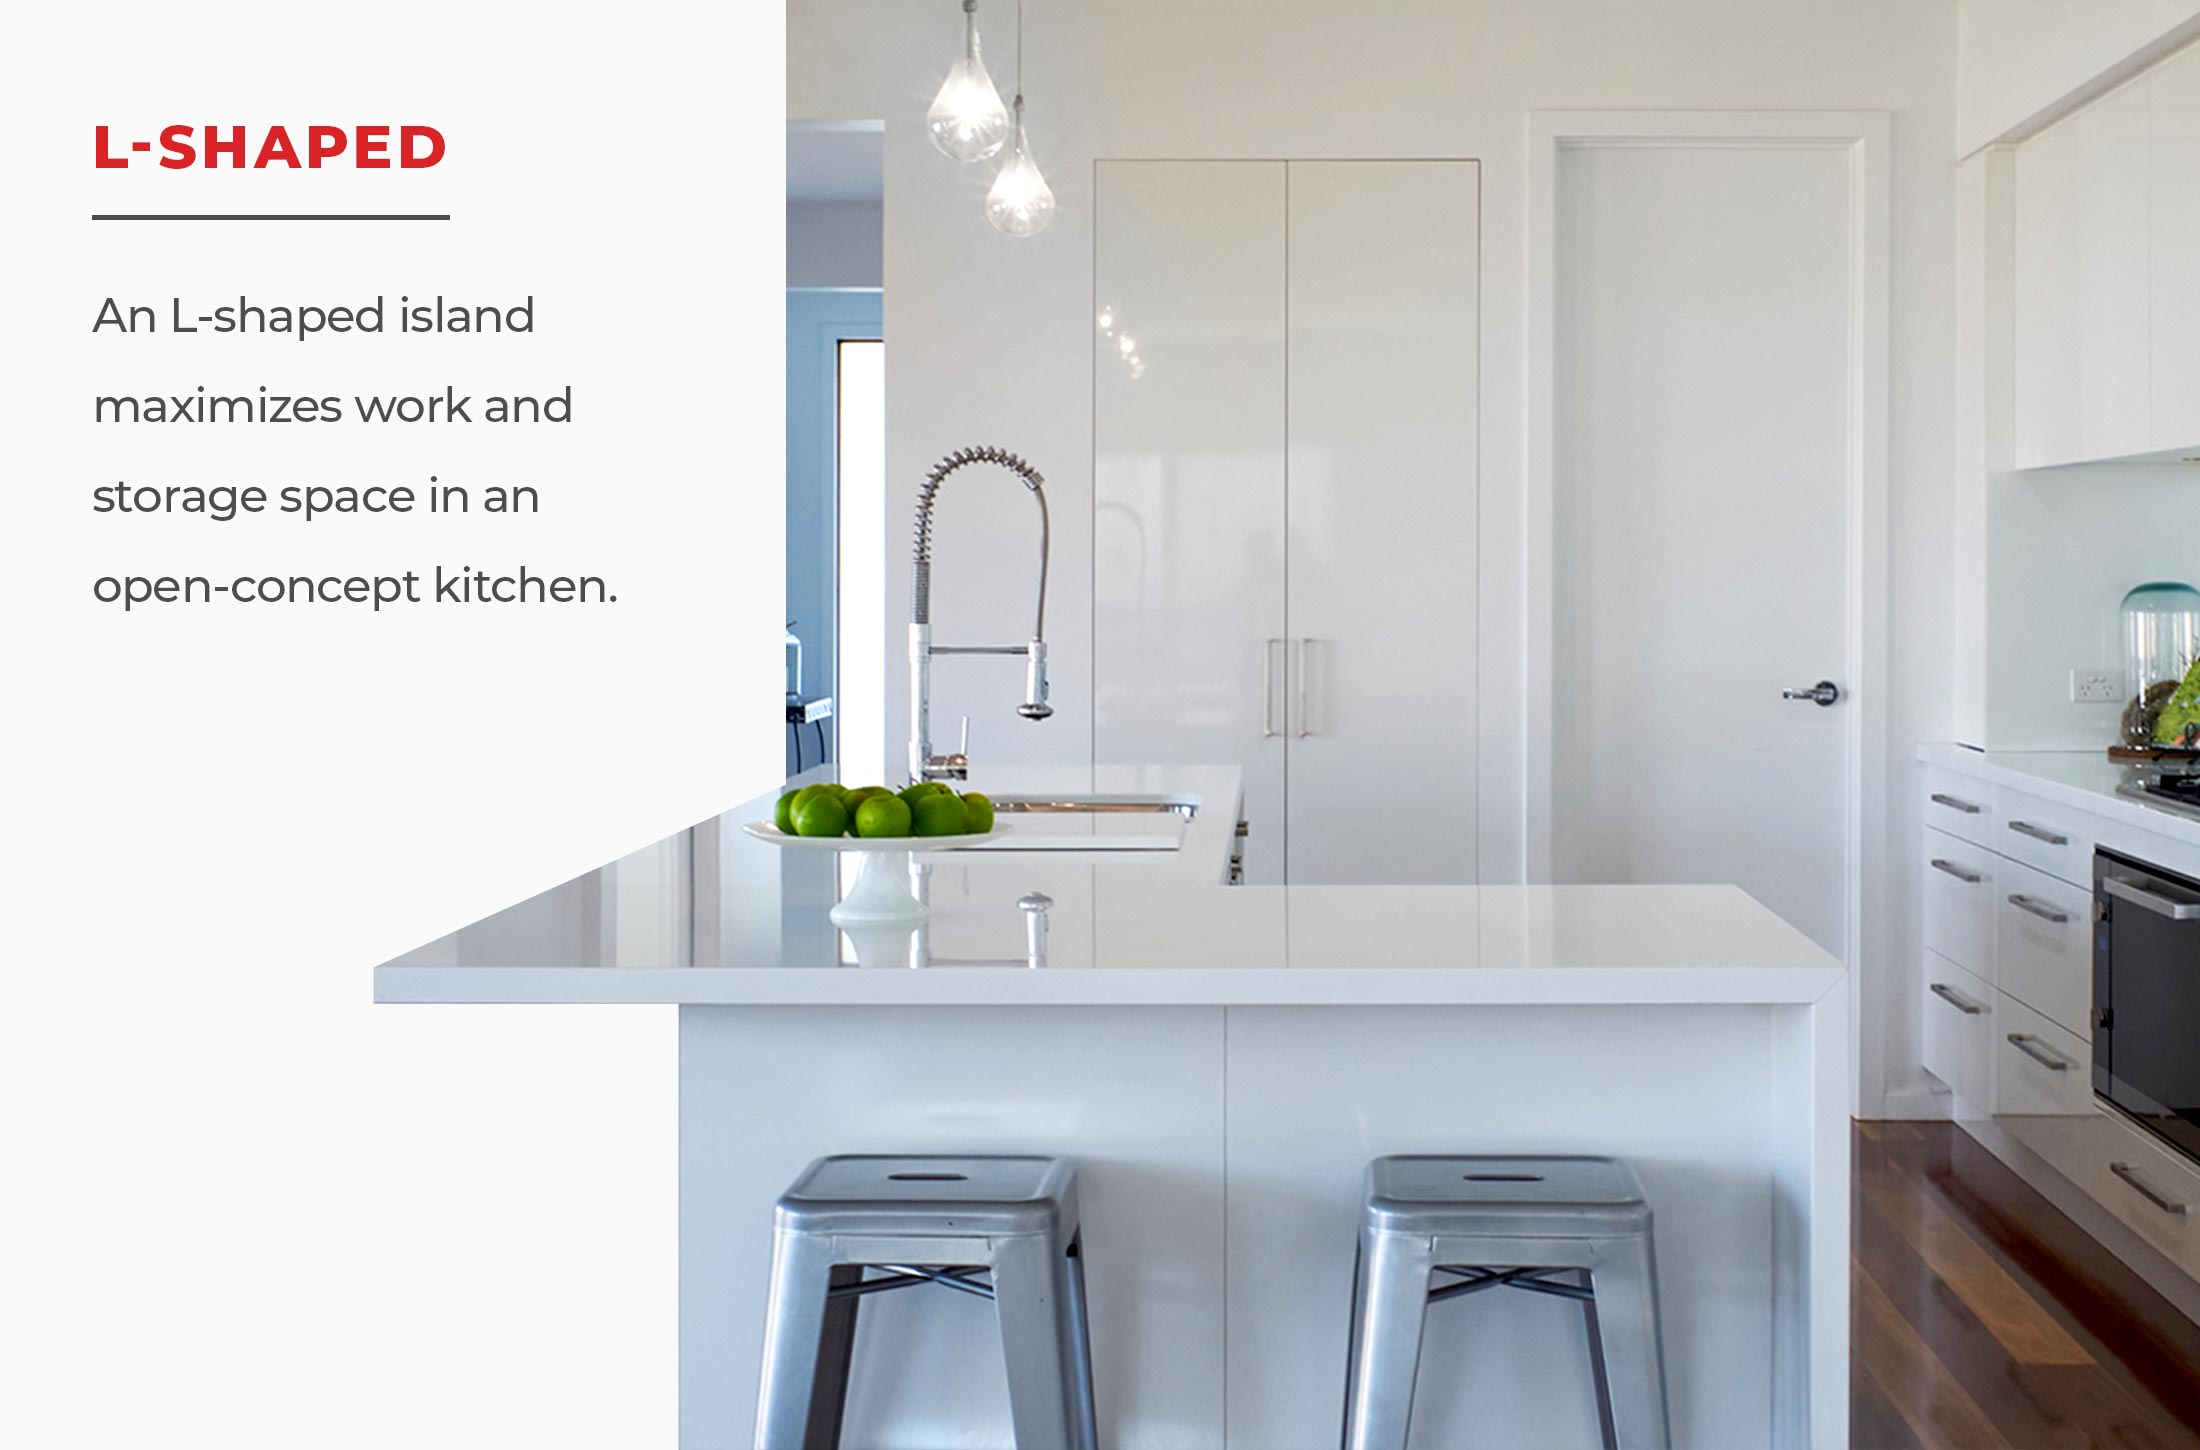 An L-shaped island maximizes work and storage space in an open-concept kitchen.